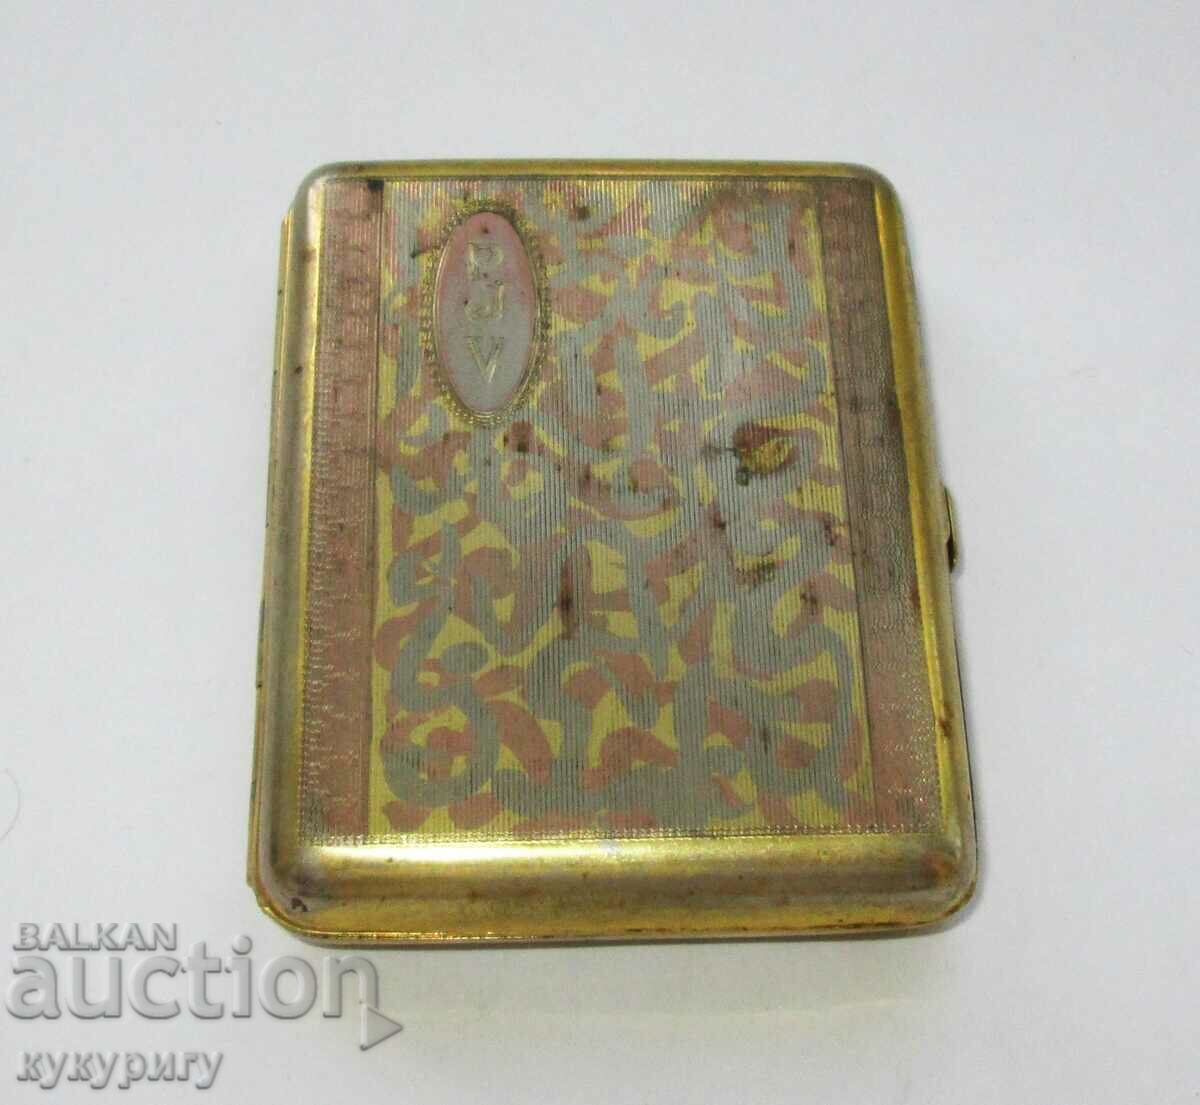 Old interesting little snuff box for cigarettes